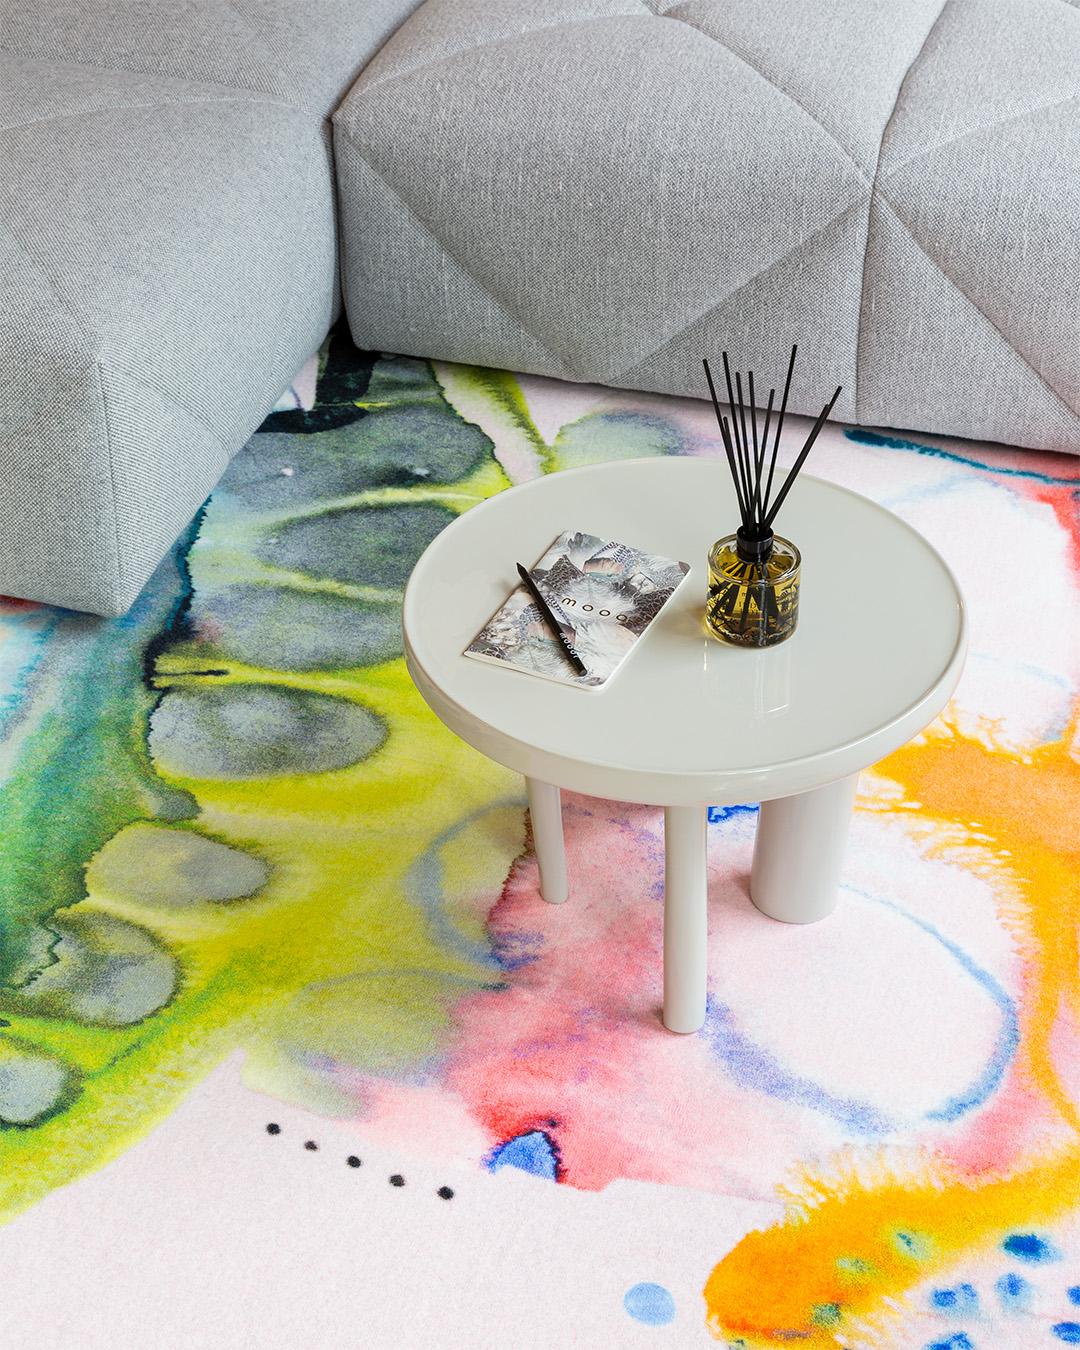 Moooi small bumblebee II rug in wool with blind hem finish by Emma Larsson

Emma Larsson is a Stockholm-based artist and illustrator. Her work strikes the balance between colourful dreamscape and inarticulable melancholy. Emma has evolved her